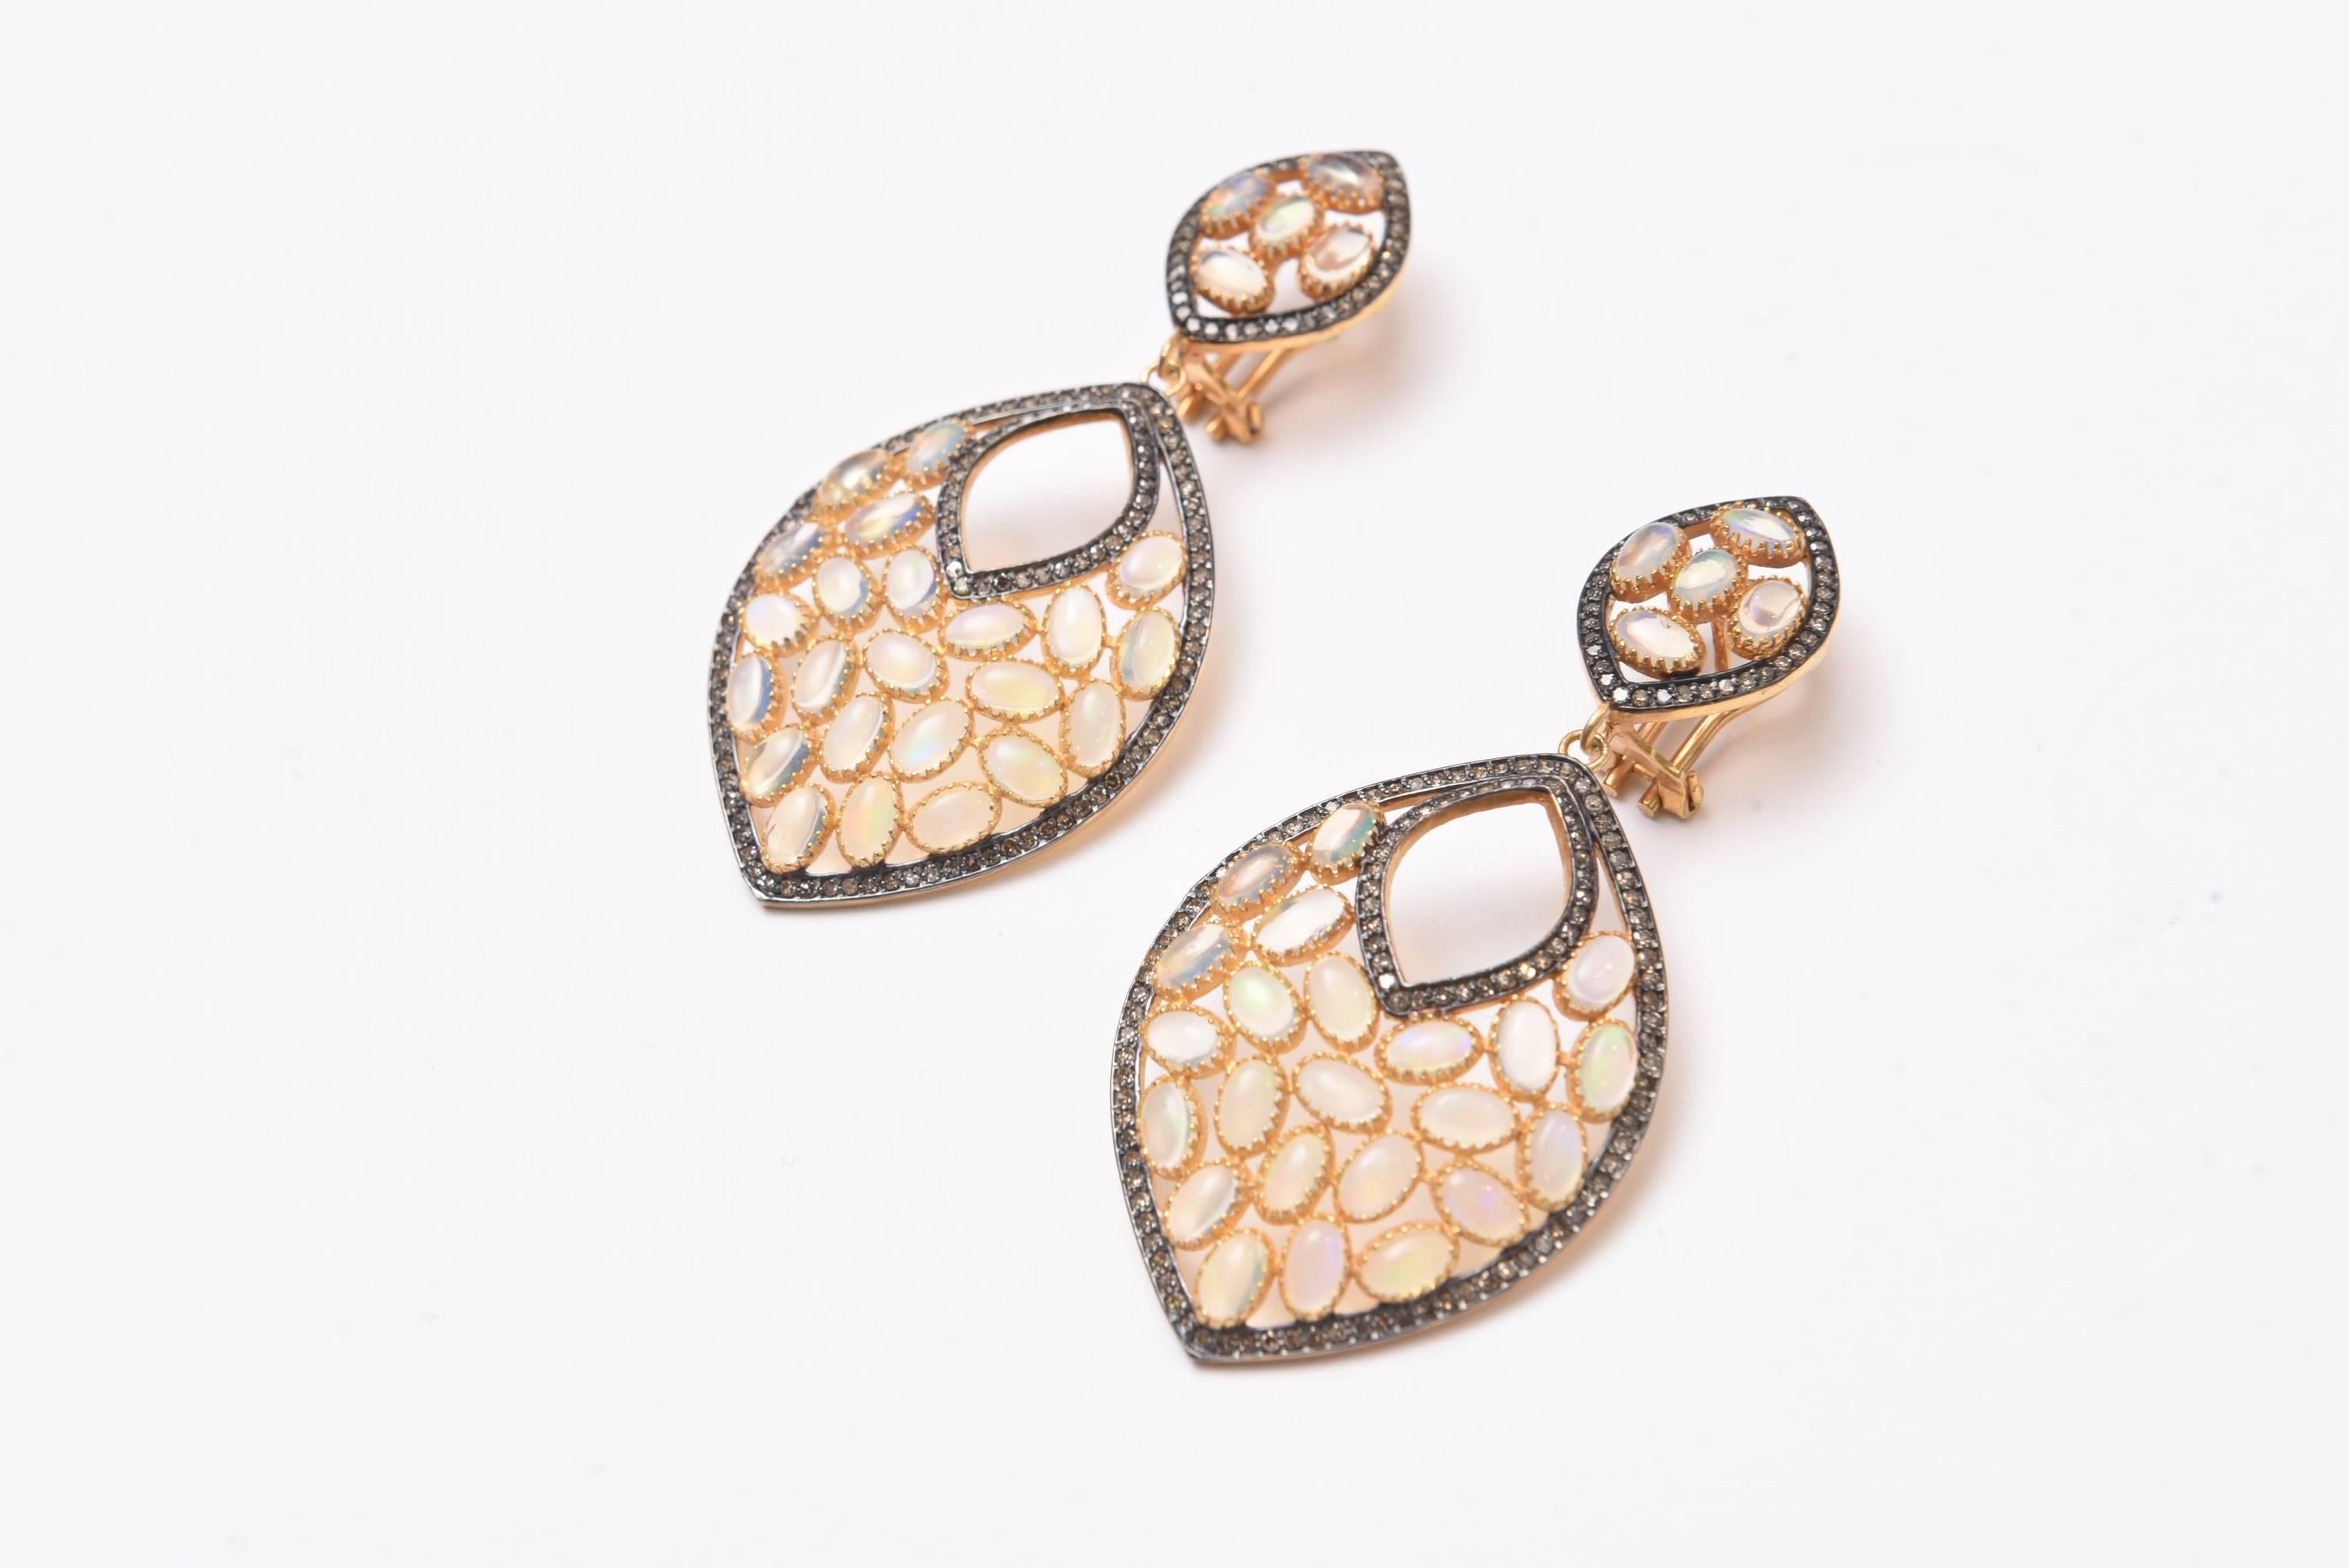 Pair of fabulous opal earrings with nice fire in the stones in a bezel setting and bordered with pave`set diamonds.  18K gold post with omega back for pierced ears, Oxidized sterling and vermeil.  Carat weight of opals is 8.08; diamonds are 1.56